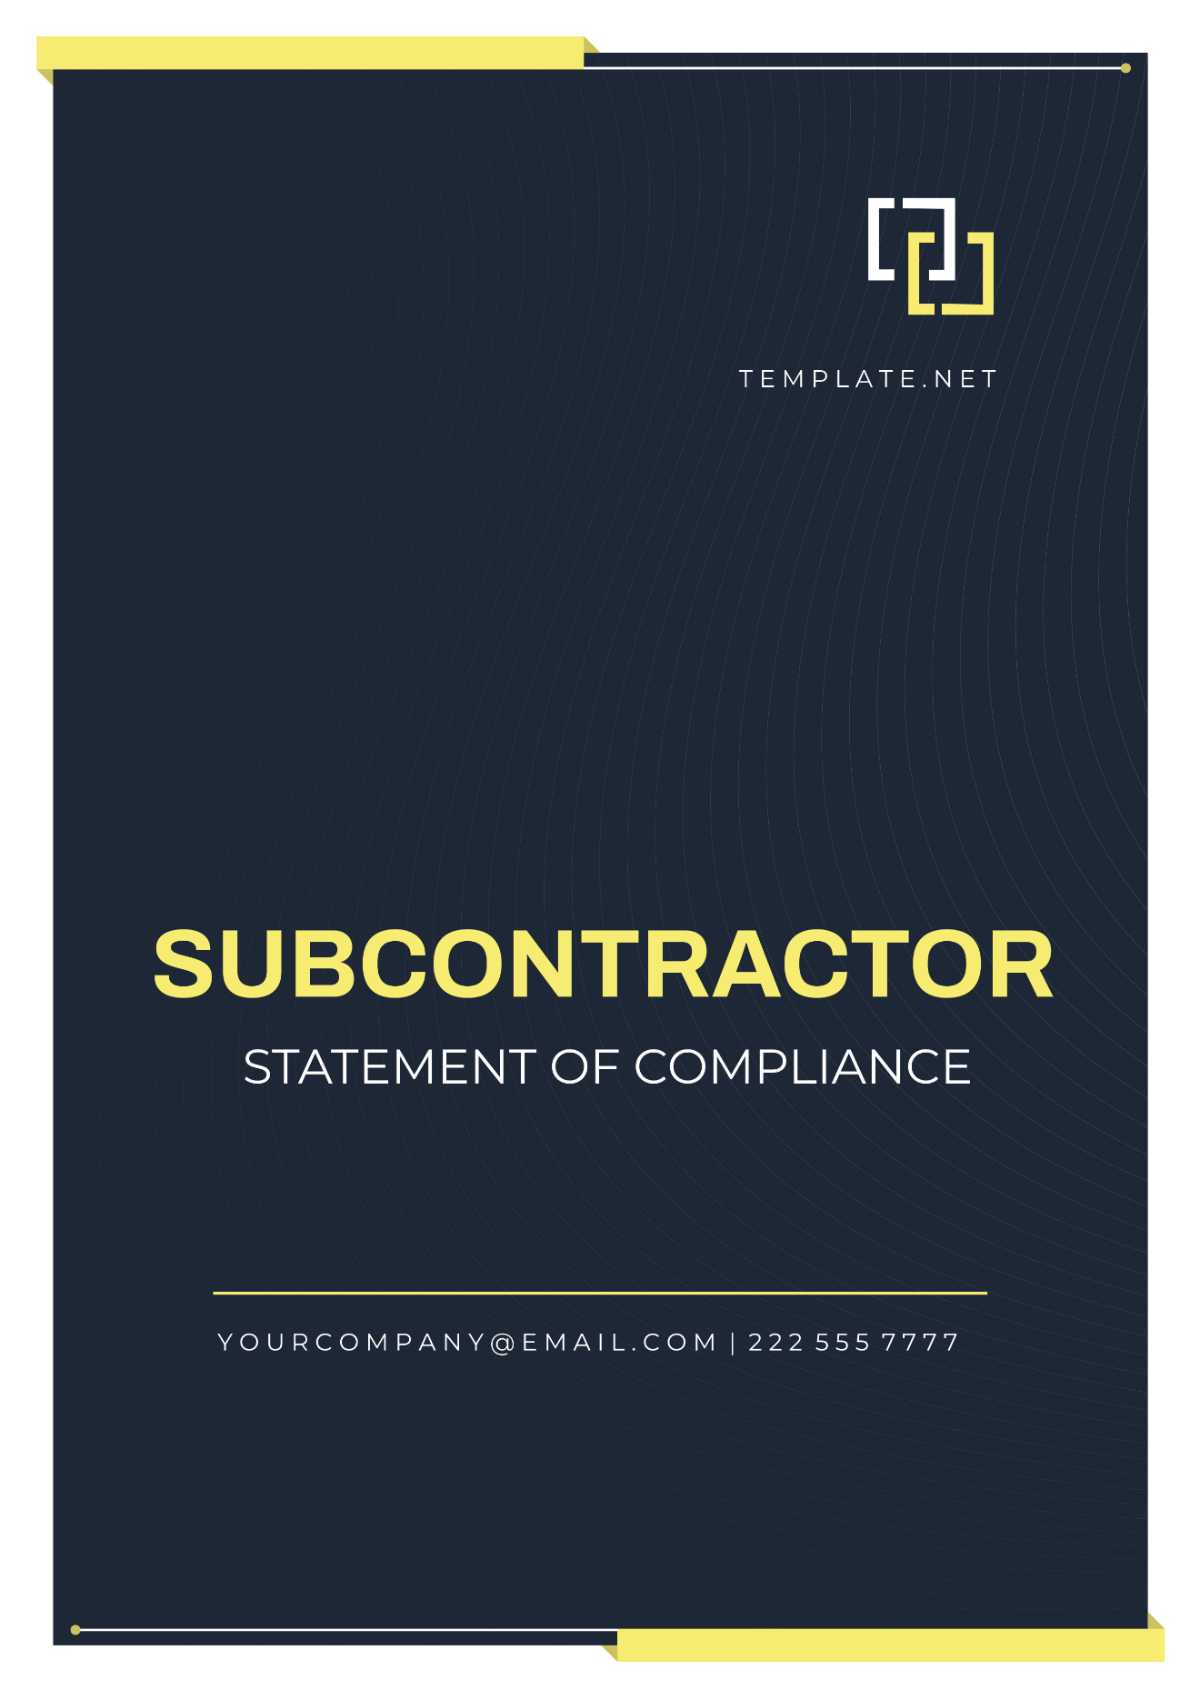 Subcontractor Statement Of Compliance Template